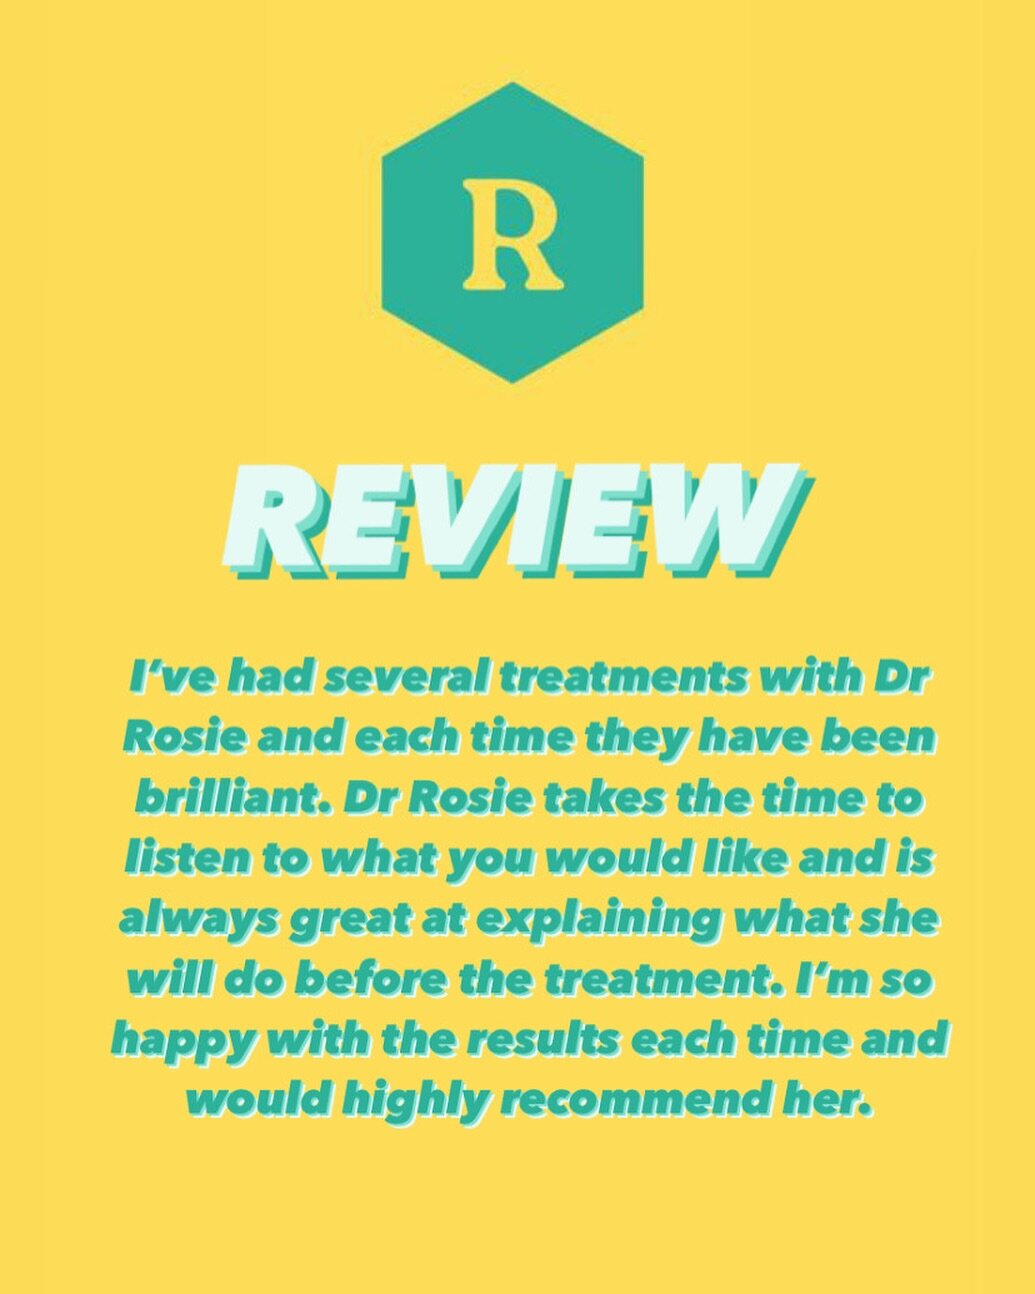 All in one review: taking time, listening, explaining, happy with results, repeat customers. 

All the things you should look for in your aesthetician! 👩🏼&zwj;⚕️